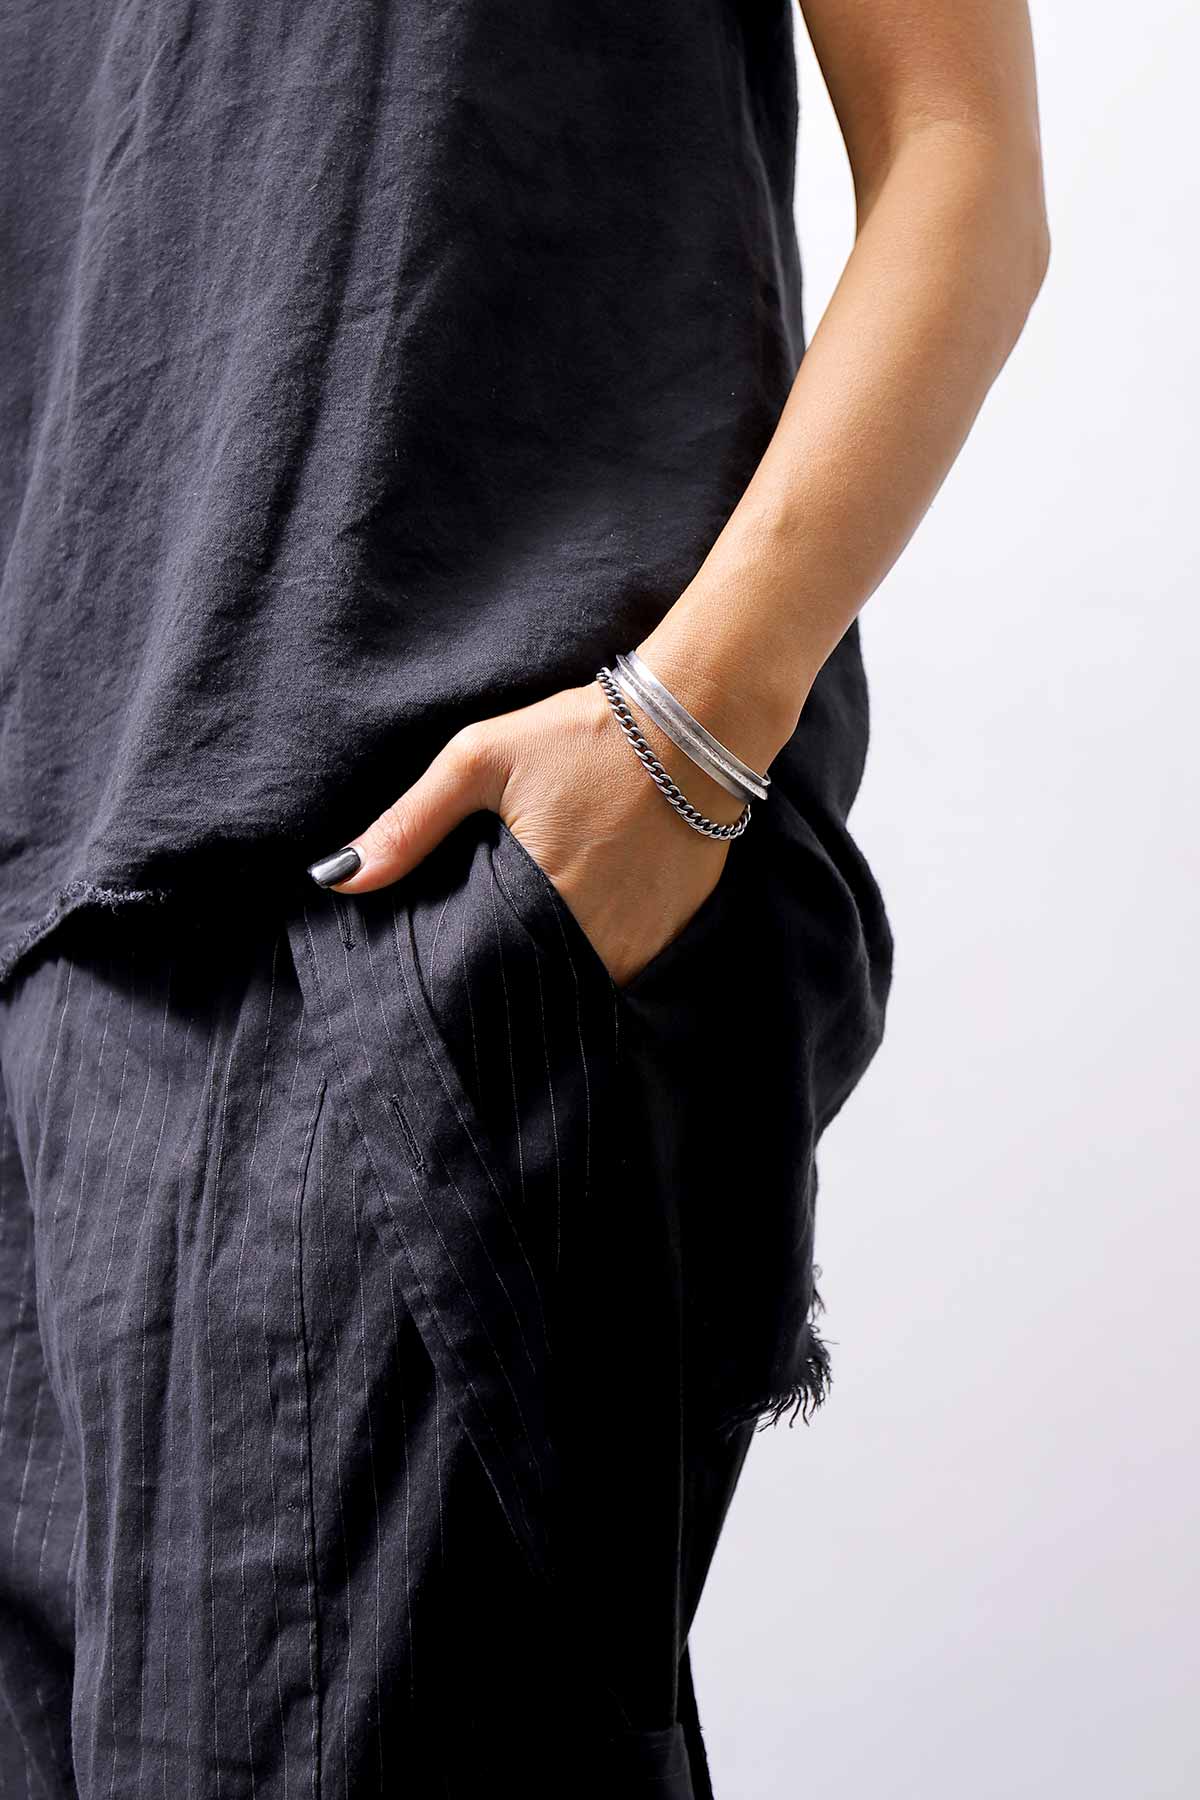 【Rusty Thought】 ENGLAVED SILVER BANGLE &amp; CUFF CHAIN_WCB5_L